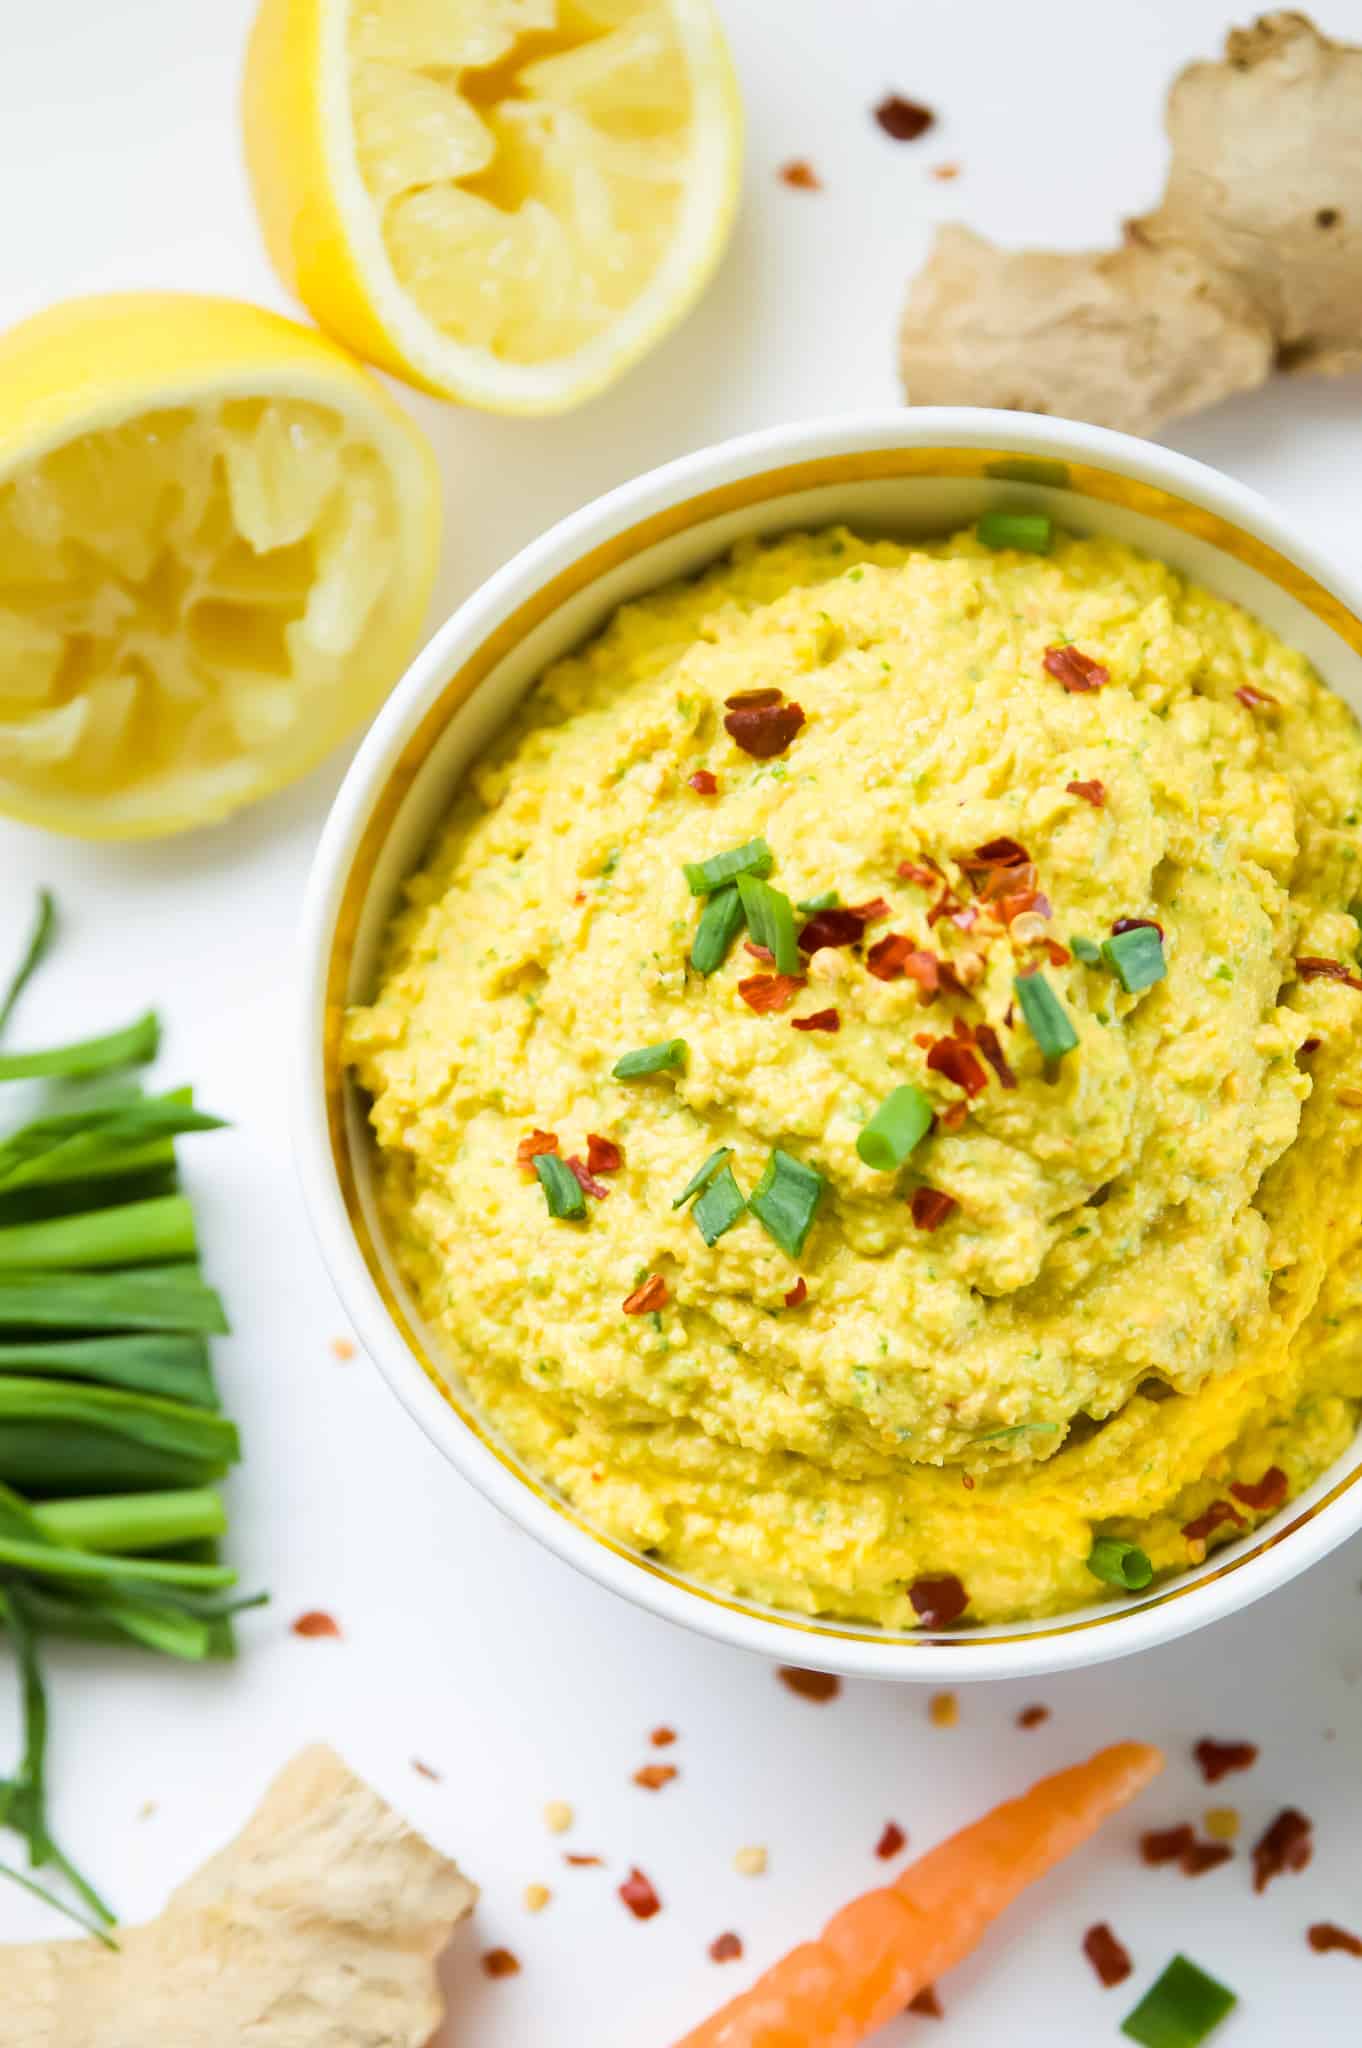 A bowl full of paleo carrot dip with chilis garnished with sliced green onions.